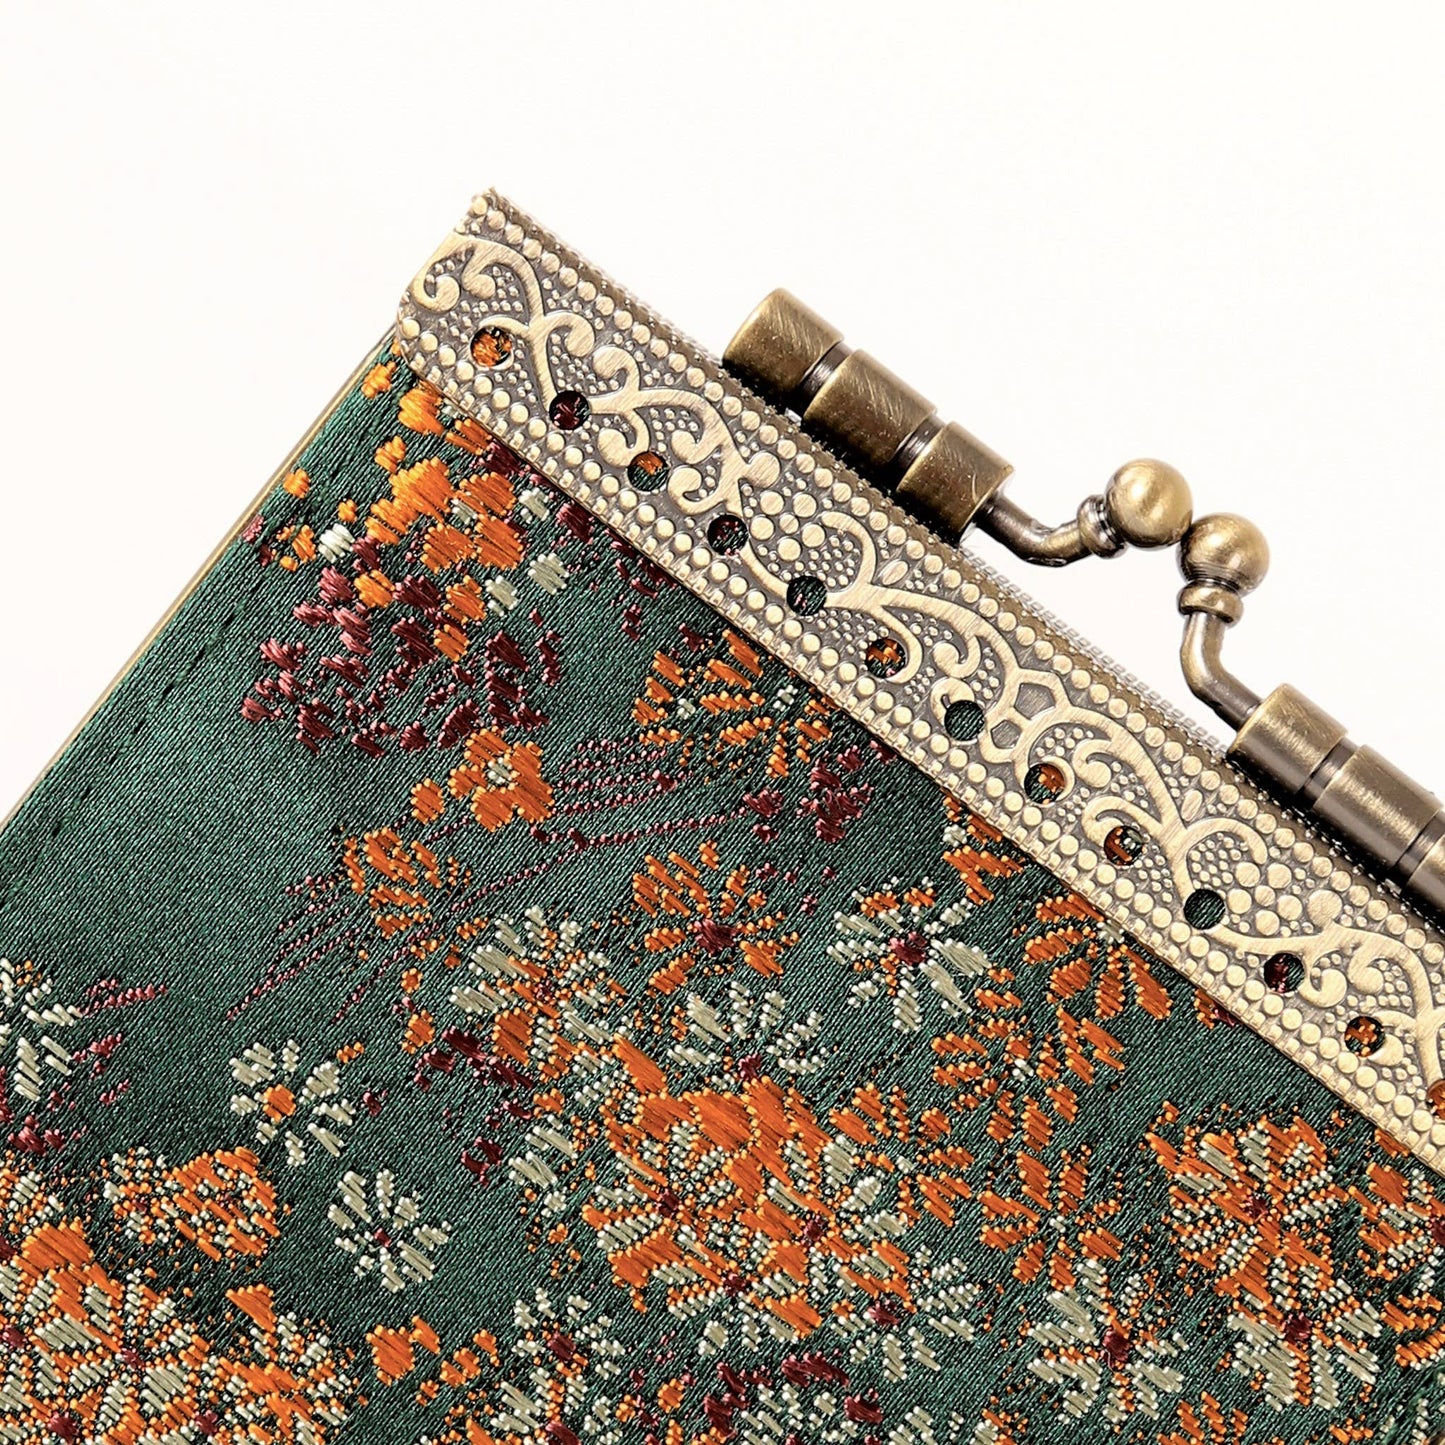 Brocade Small Floral Pattern Card Holder